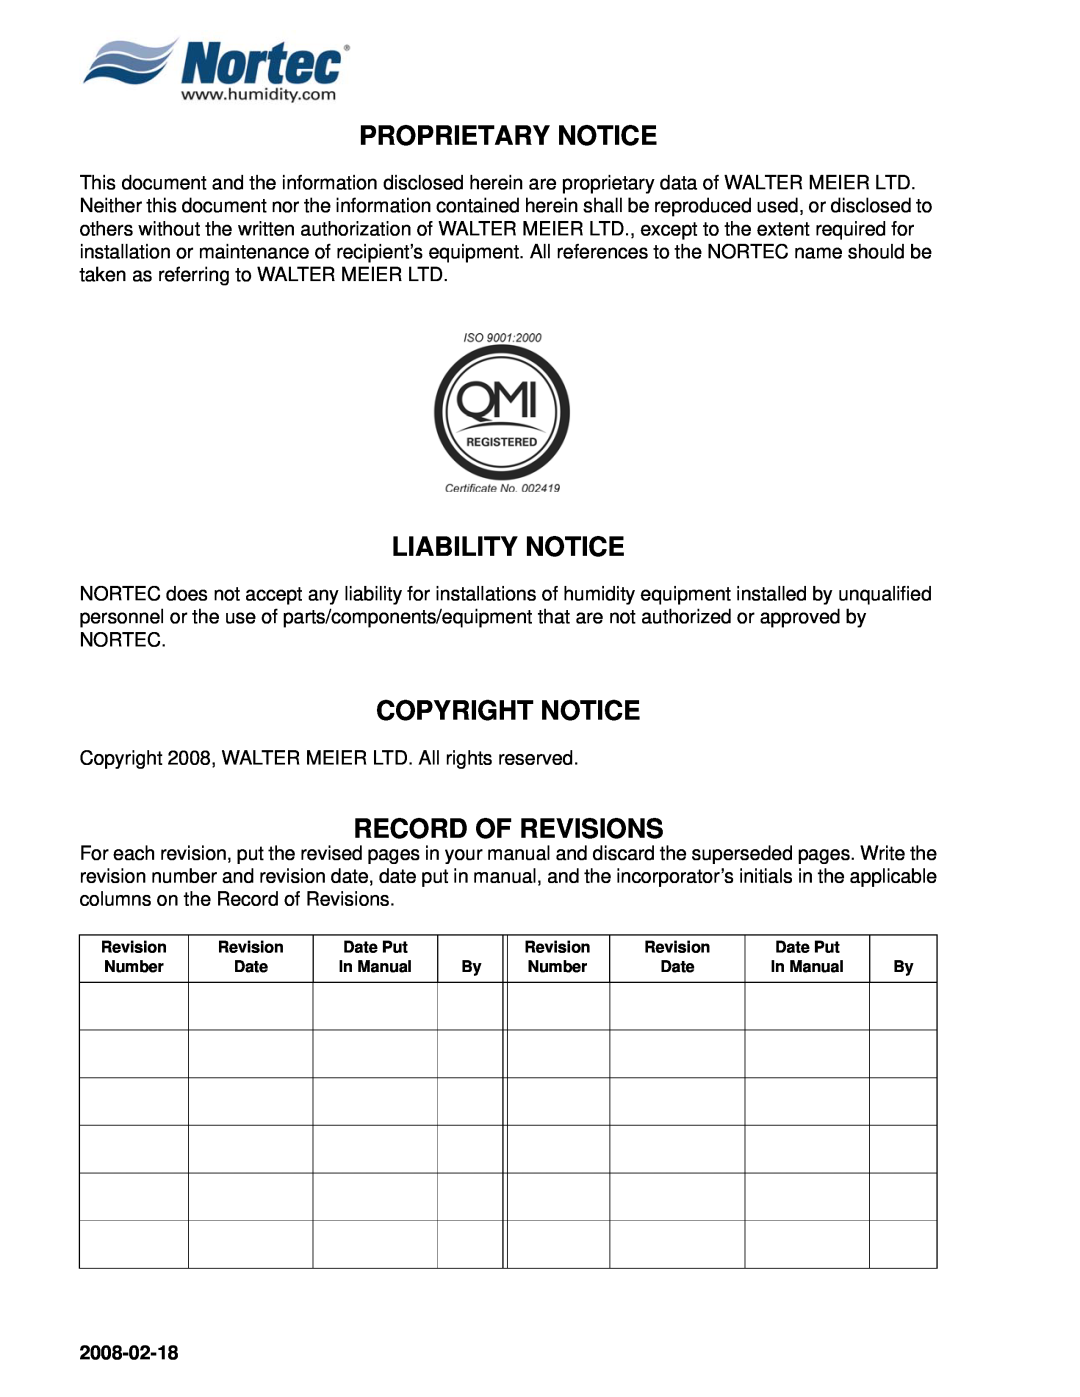 Nortec Industries NHTC Series Proprietary Notice, Liability Notice, Copyright Notice, Record Of Revisions, 2008-02-18 